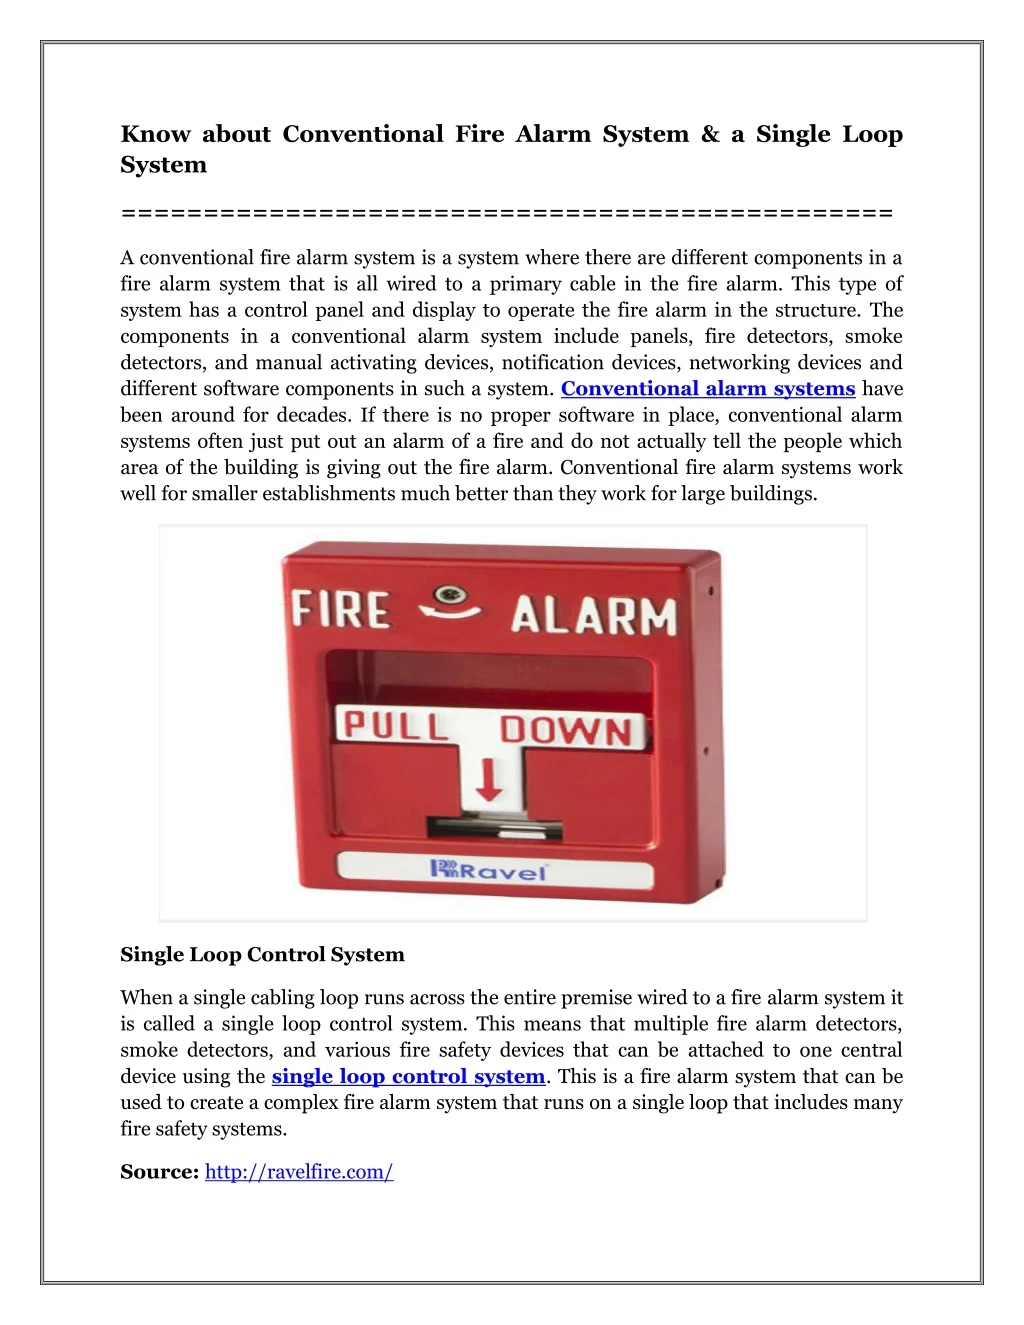 know about conventional fire alarm system